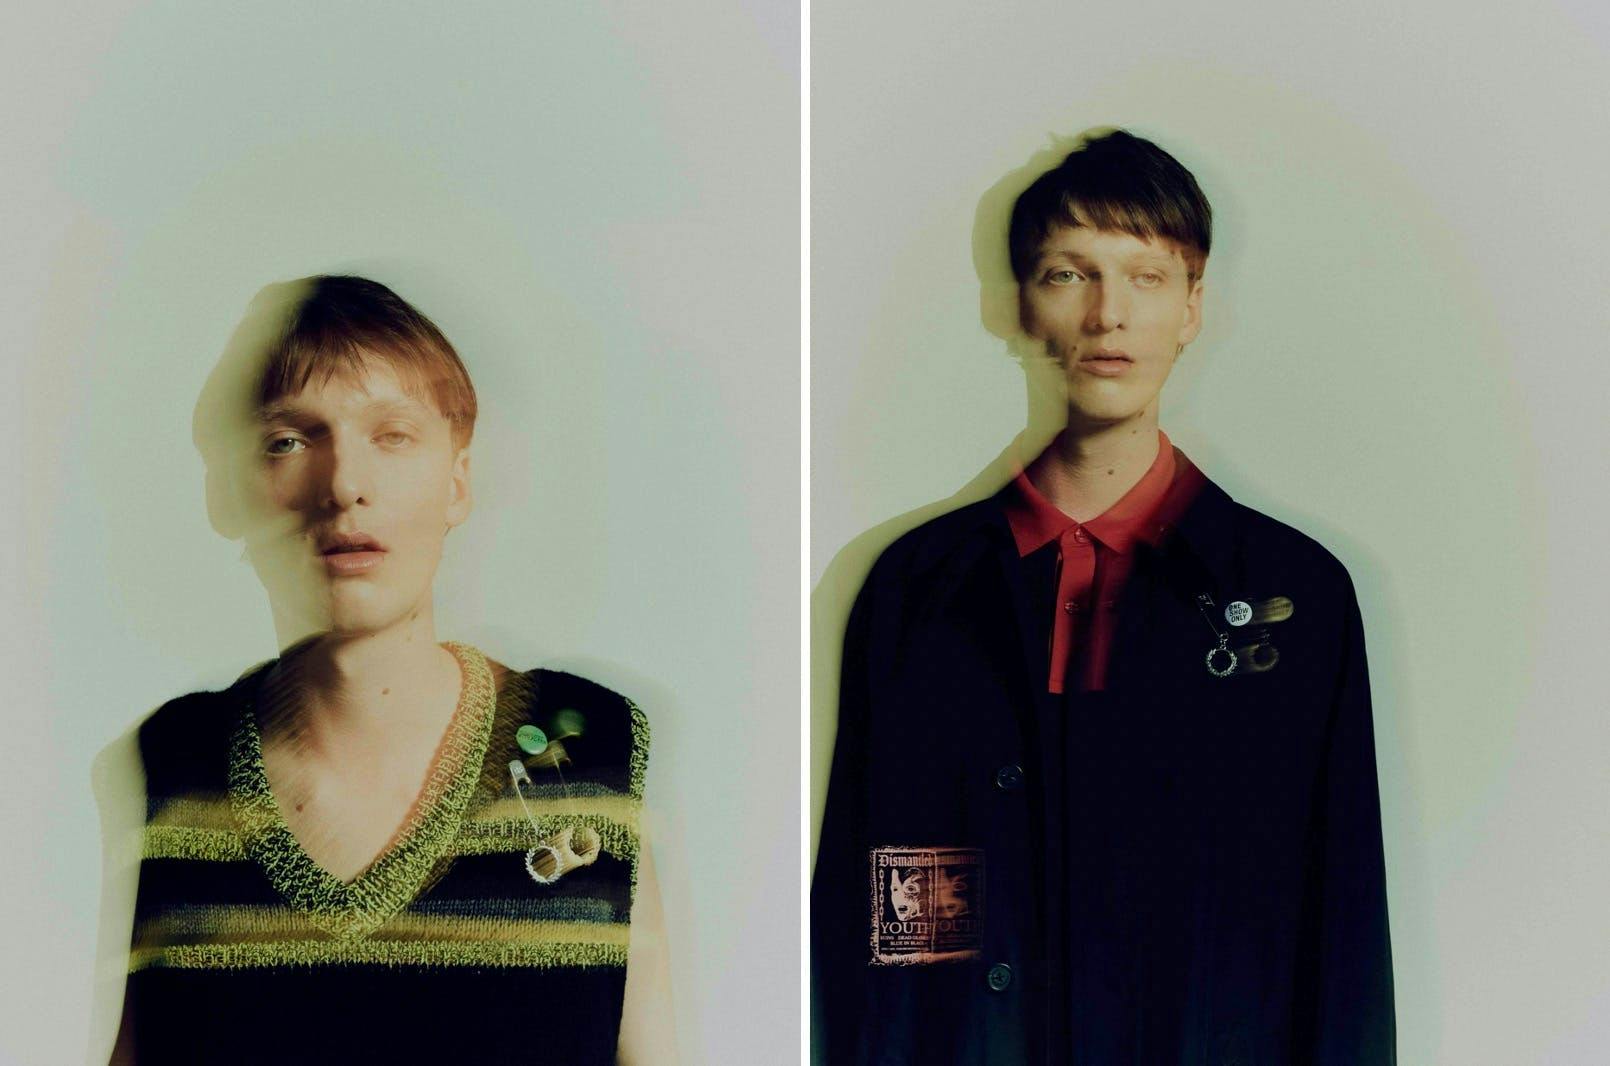 Nella foto Fred Perry x Raf Simons la collezione "The energy and freedom of youth"